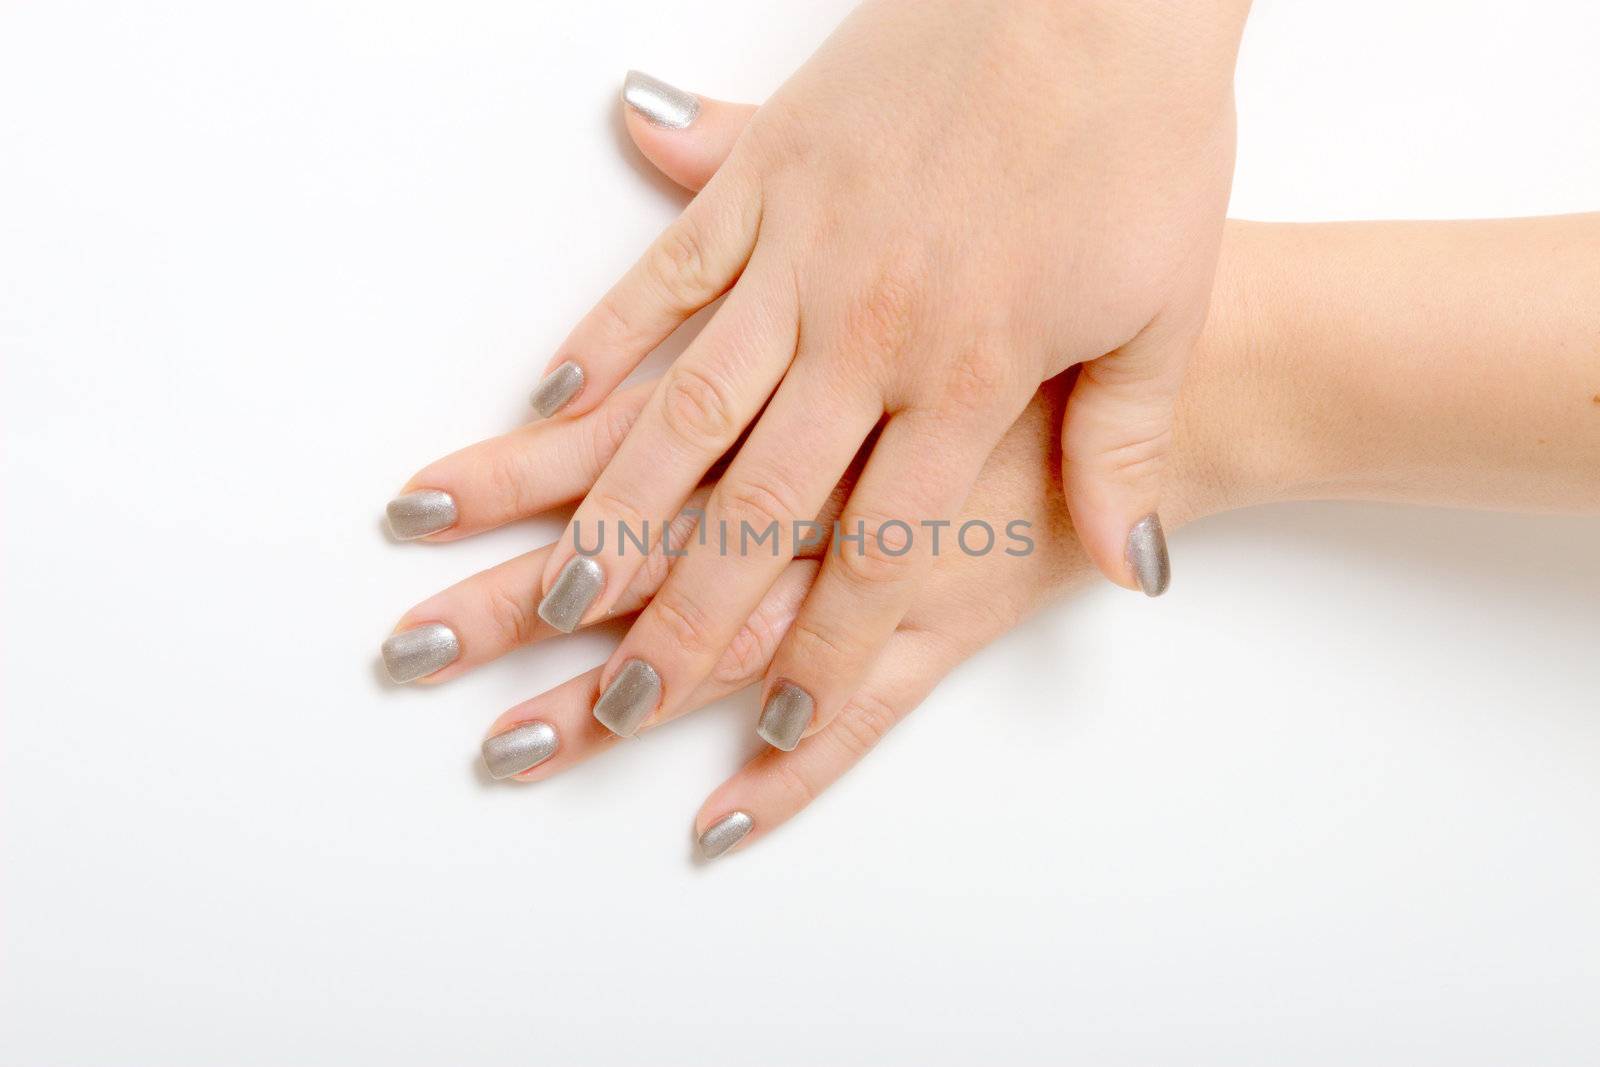 polishing the fingernails and manicure in a beautycenter